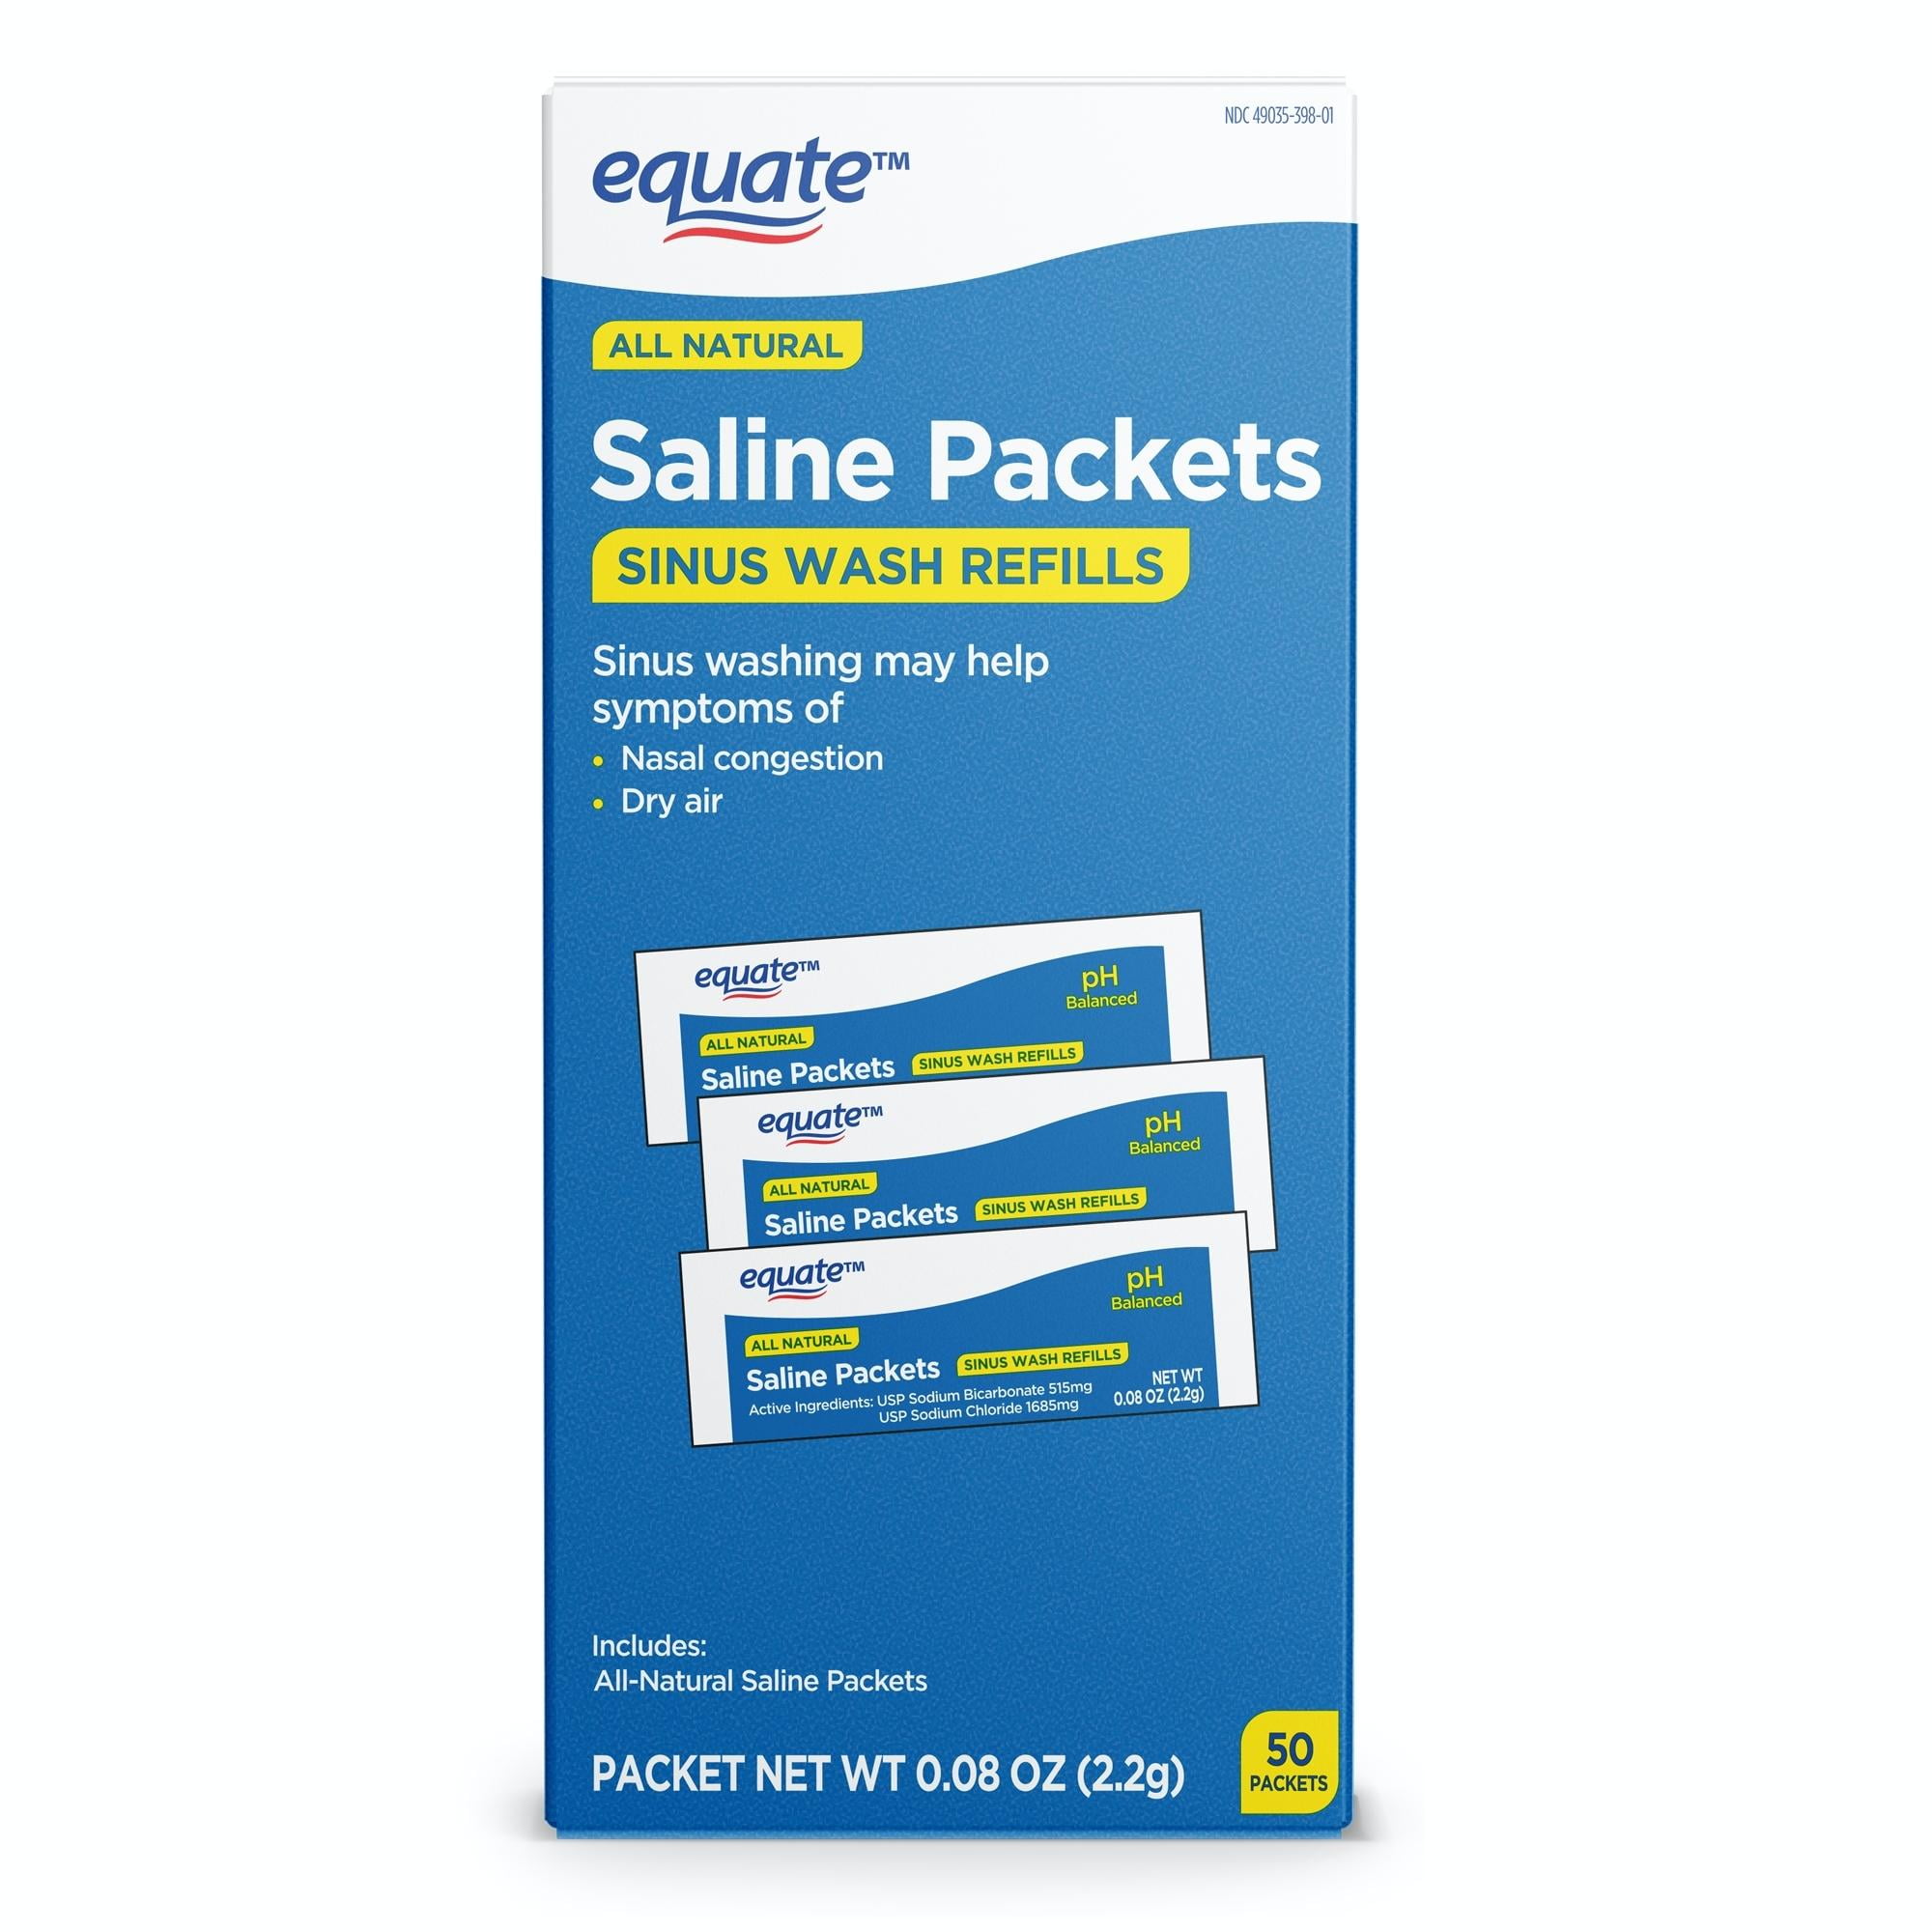 Equate Saline Packet Sinus Wash Refills for Allergies and Sinus Congestion, 50 Count